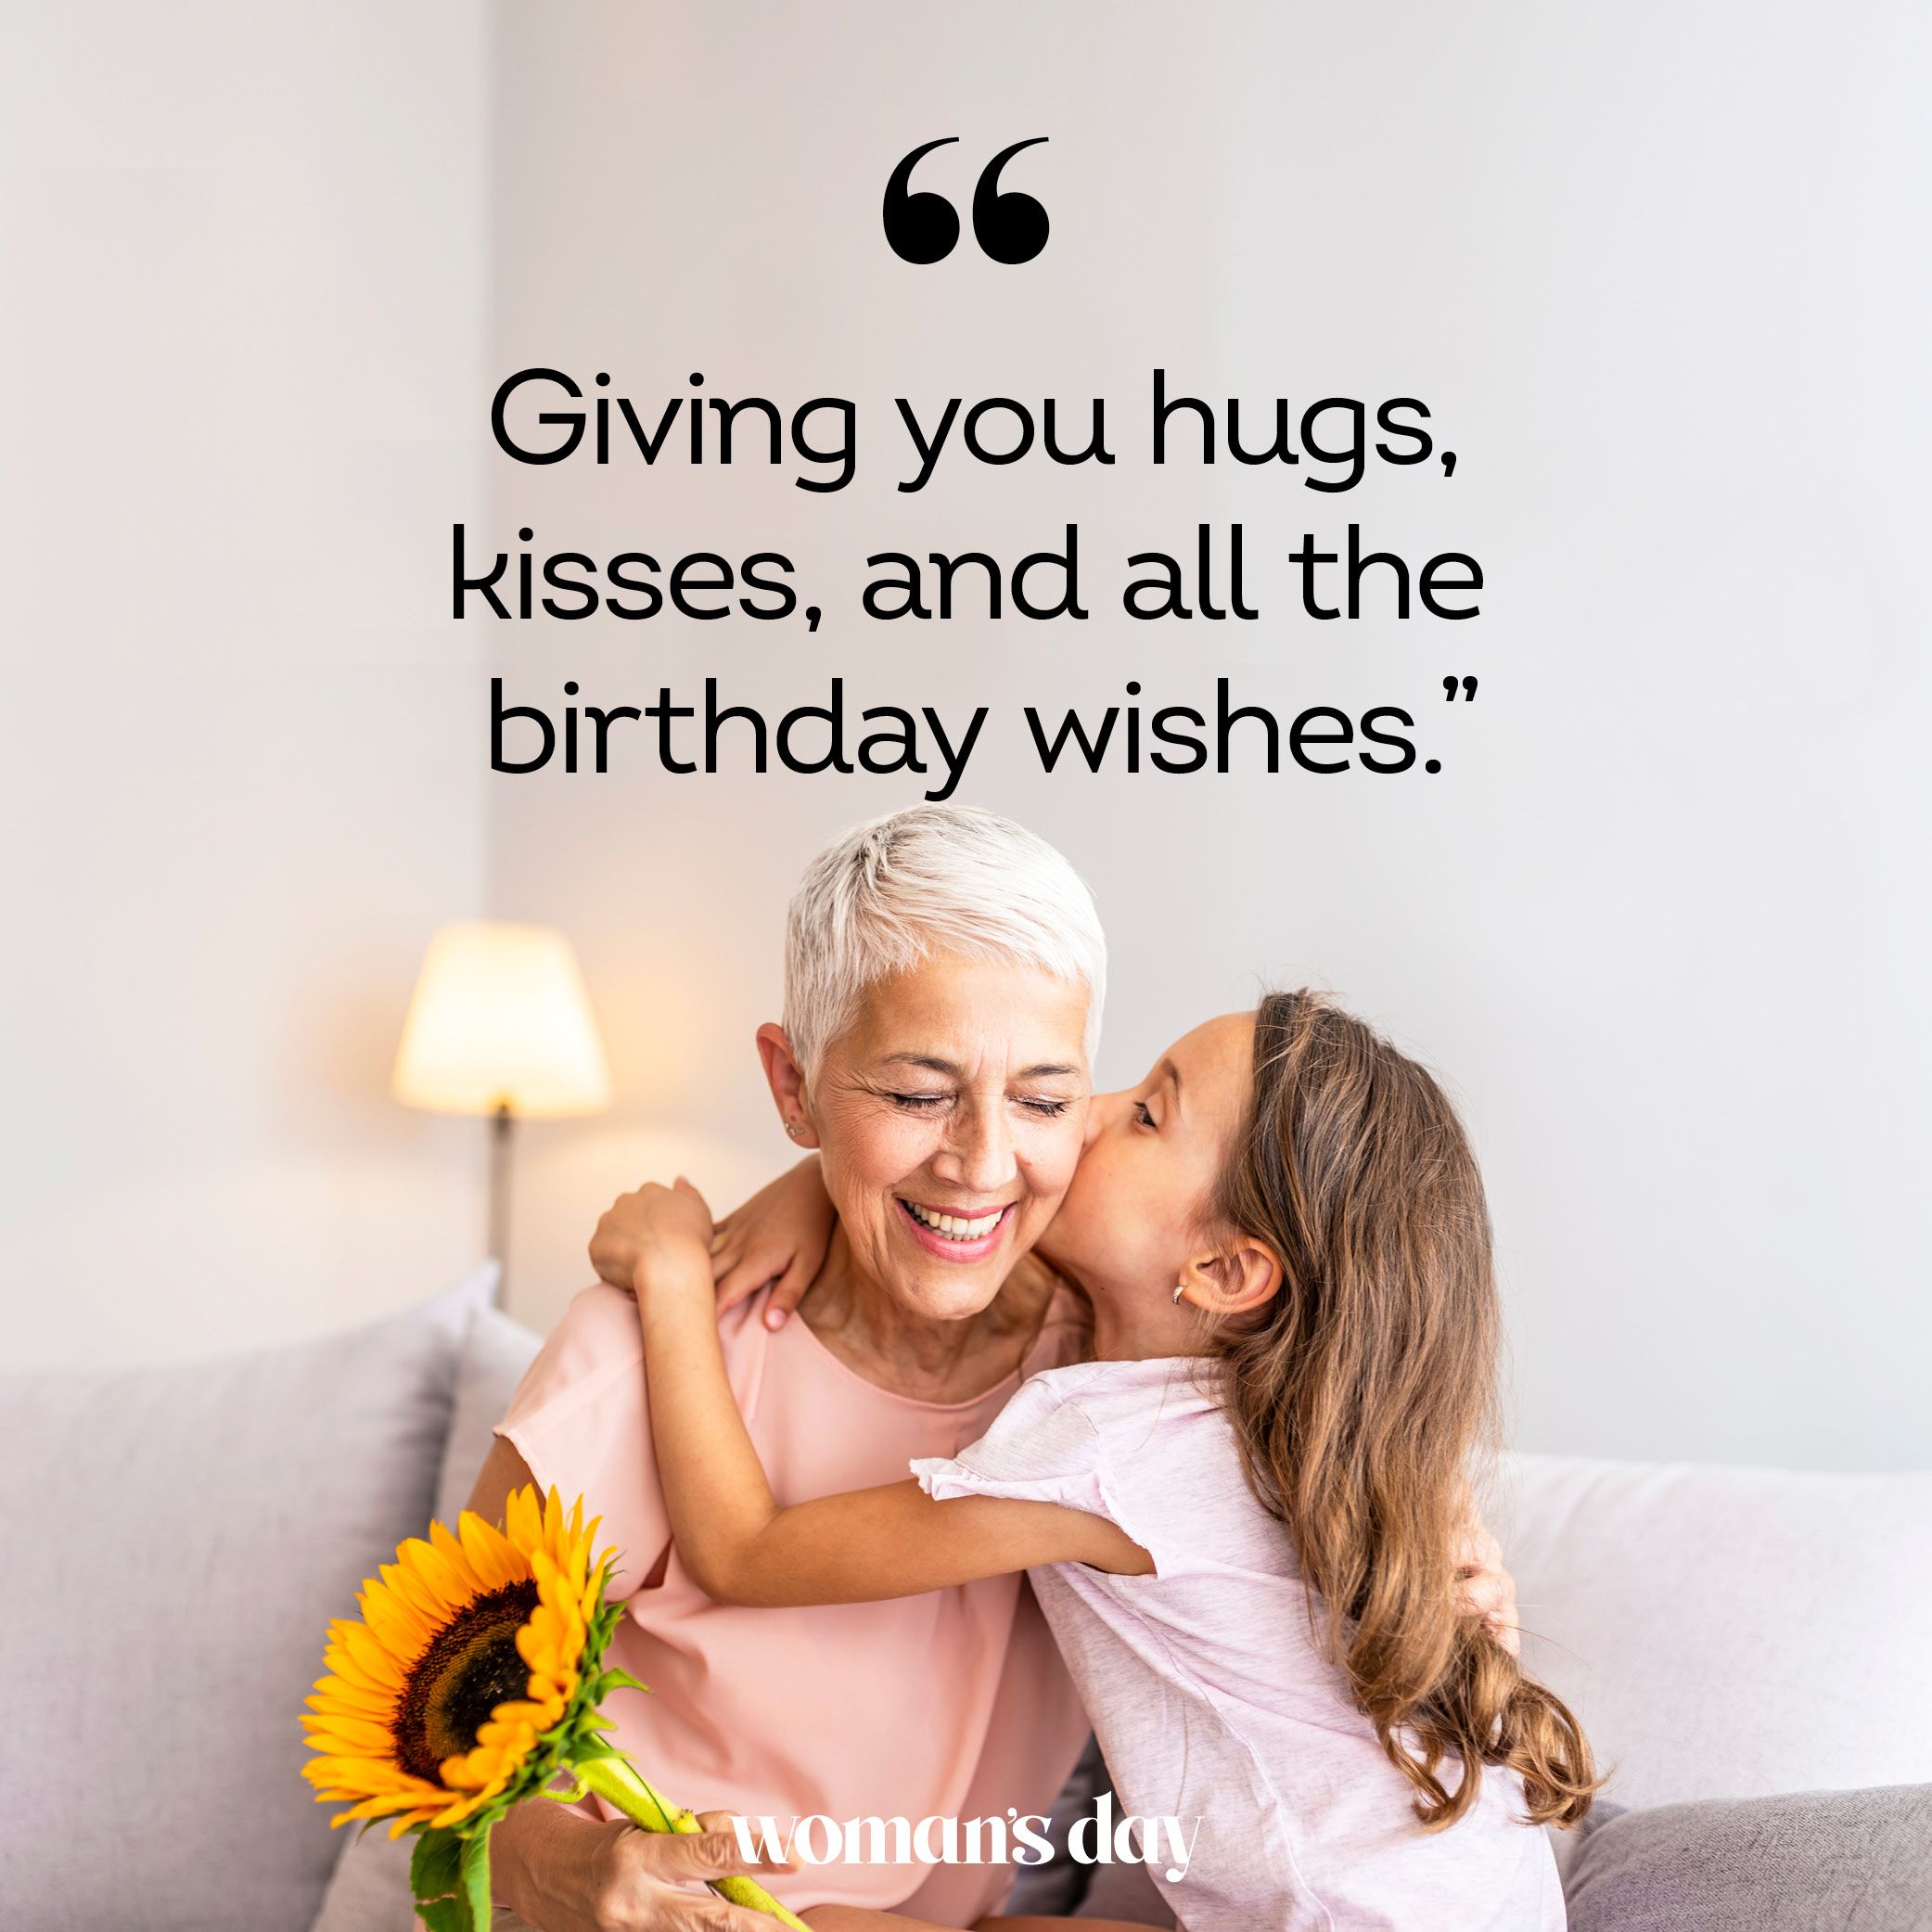 5 Gift Ideas for Your Mother's Birthday - Indiagift